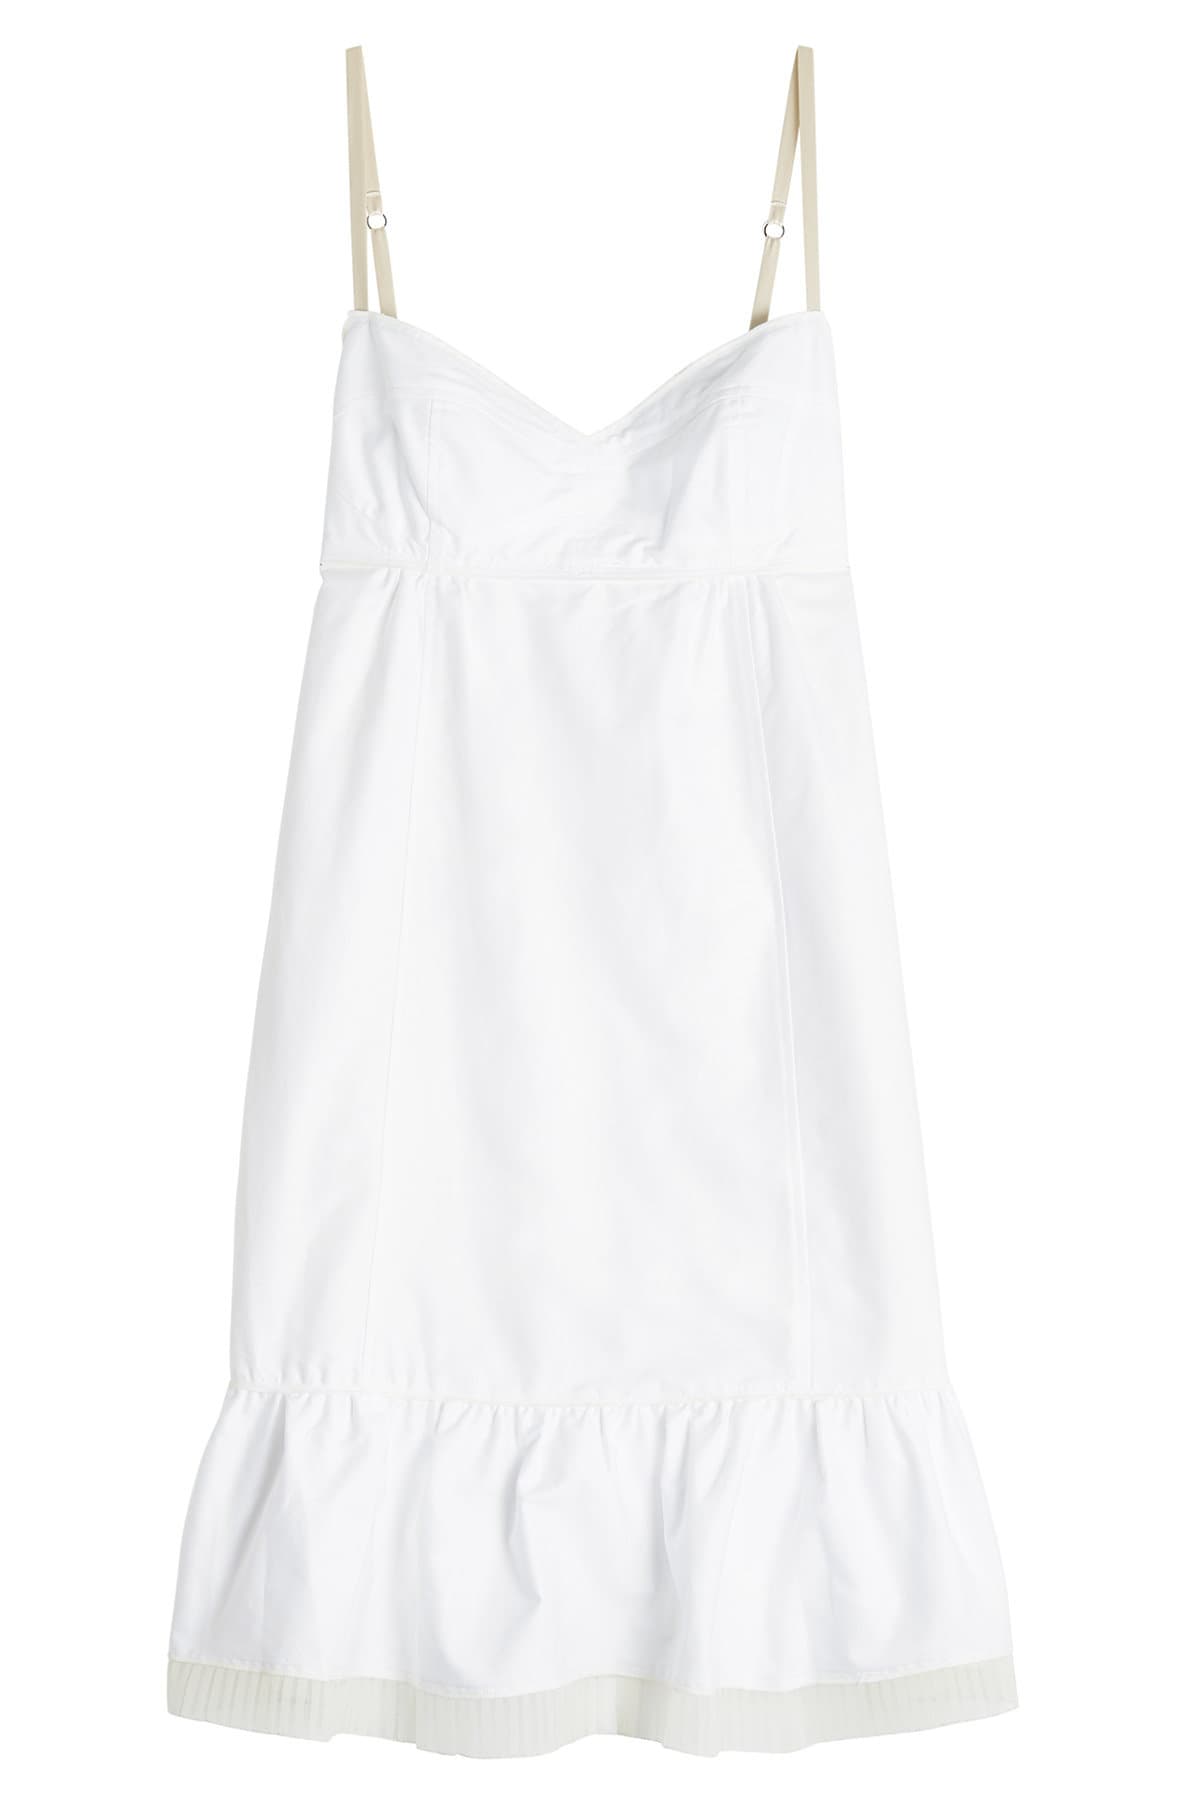 Marc Jacobs - Cotton Dress with Pleated Chiffon Trim